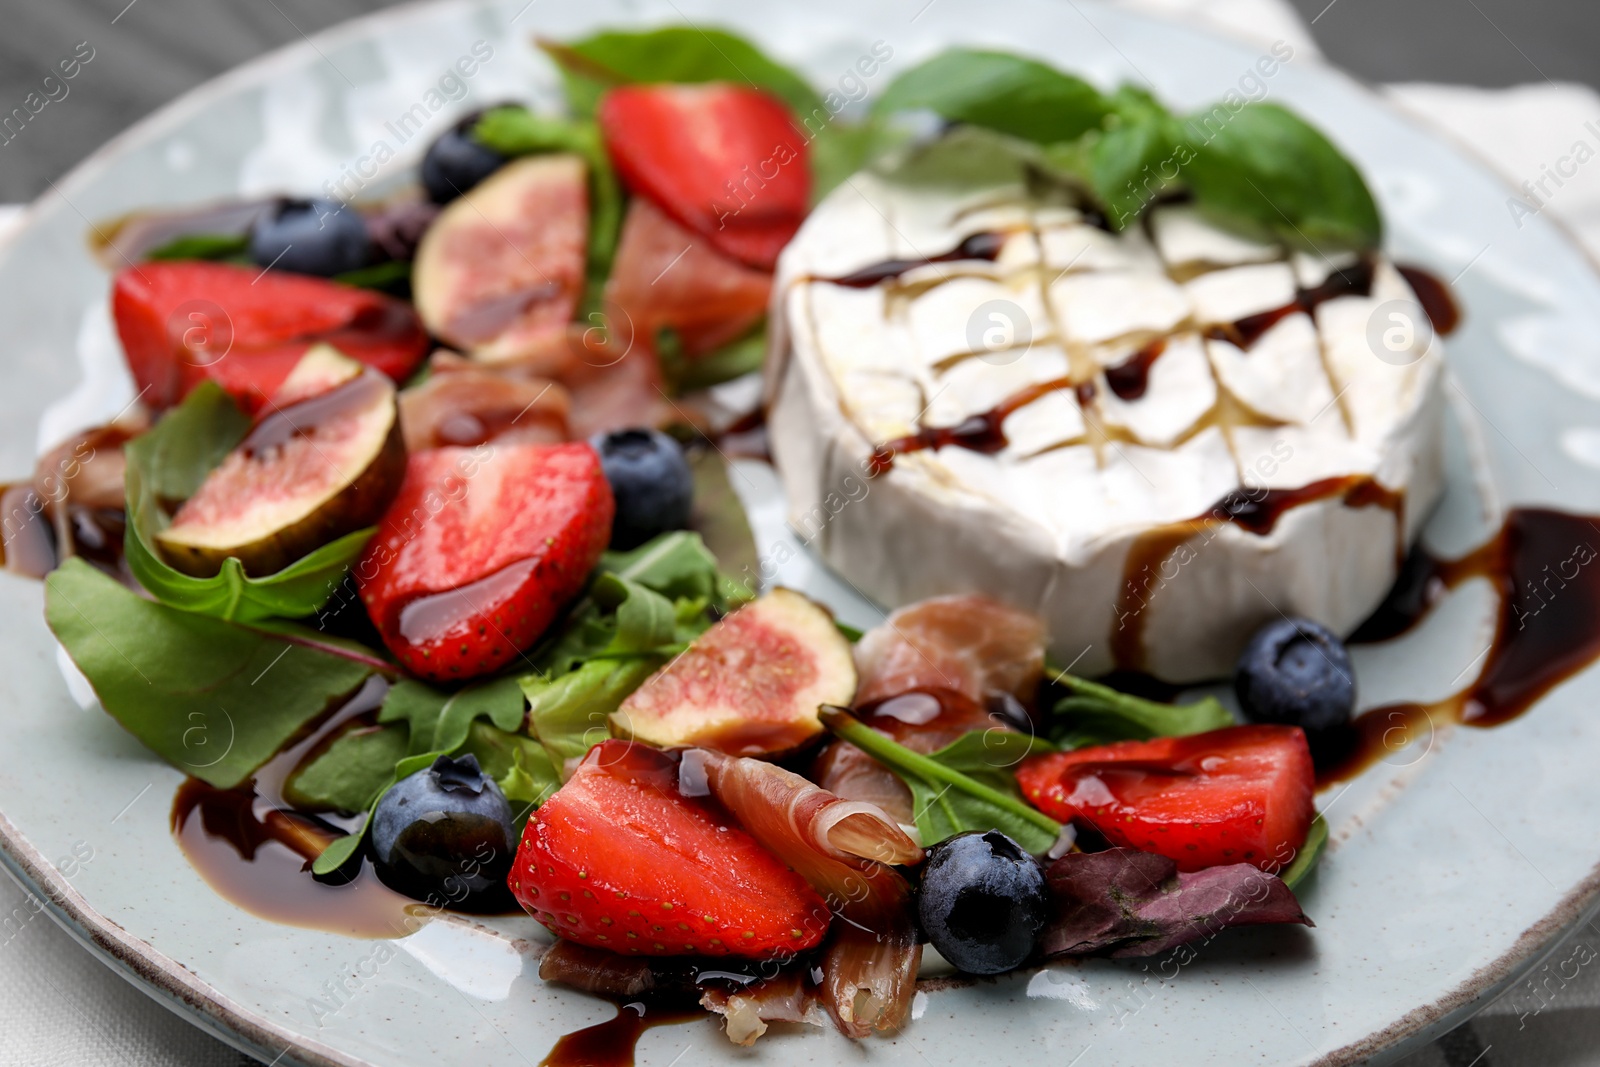 Photo of Delicious salad with brie cheese, prosciutto, berries and balsamic vinegar on plate, closeup